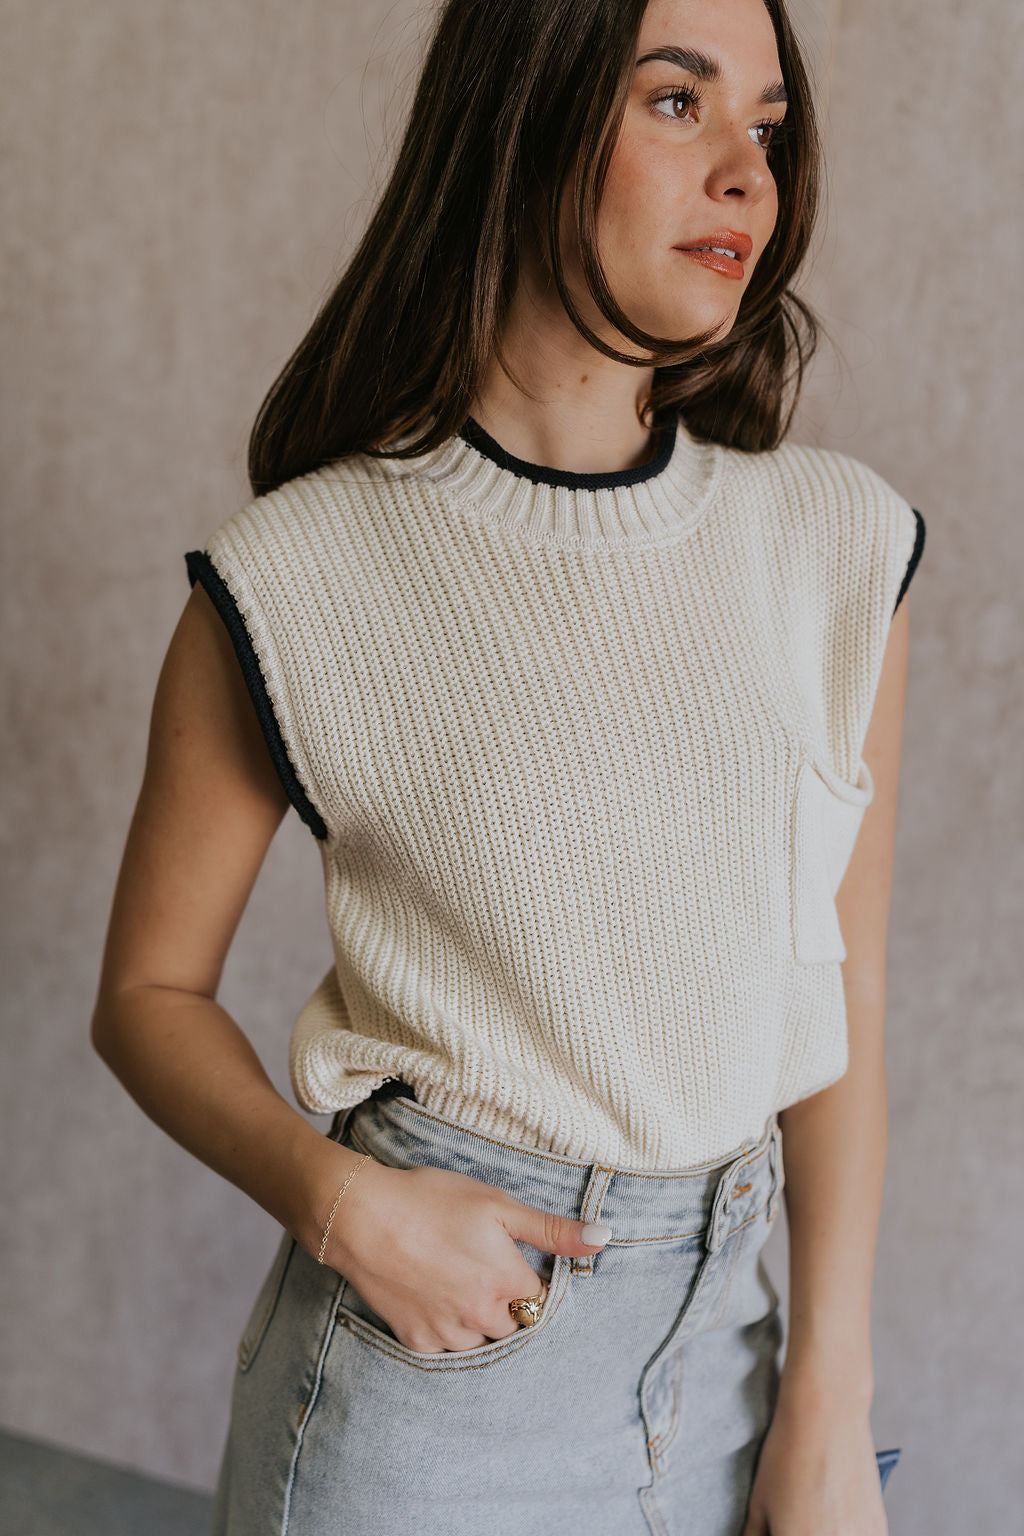 Side view of female model wearing the Vivian Ivory & Navy Knit Sleeveless Sweater which features Cream Cable Knit Fabric, Navy Trim Details, Left Front Chest Pocket, High Neckline and Sleeveless.